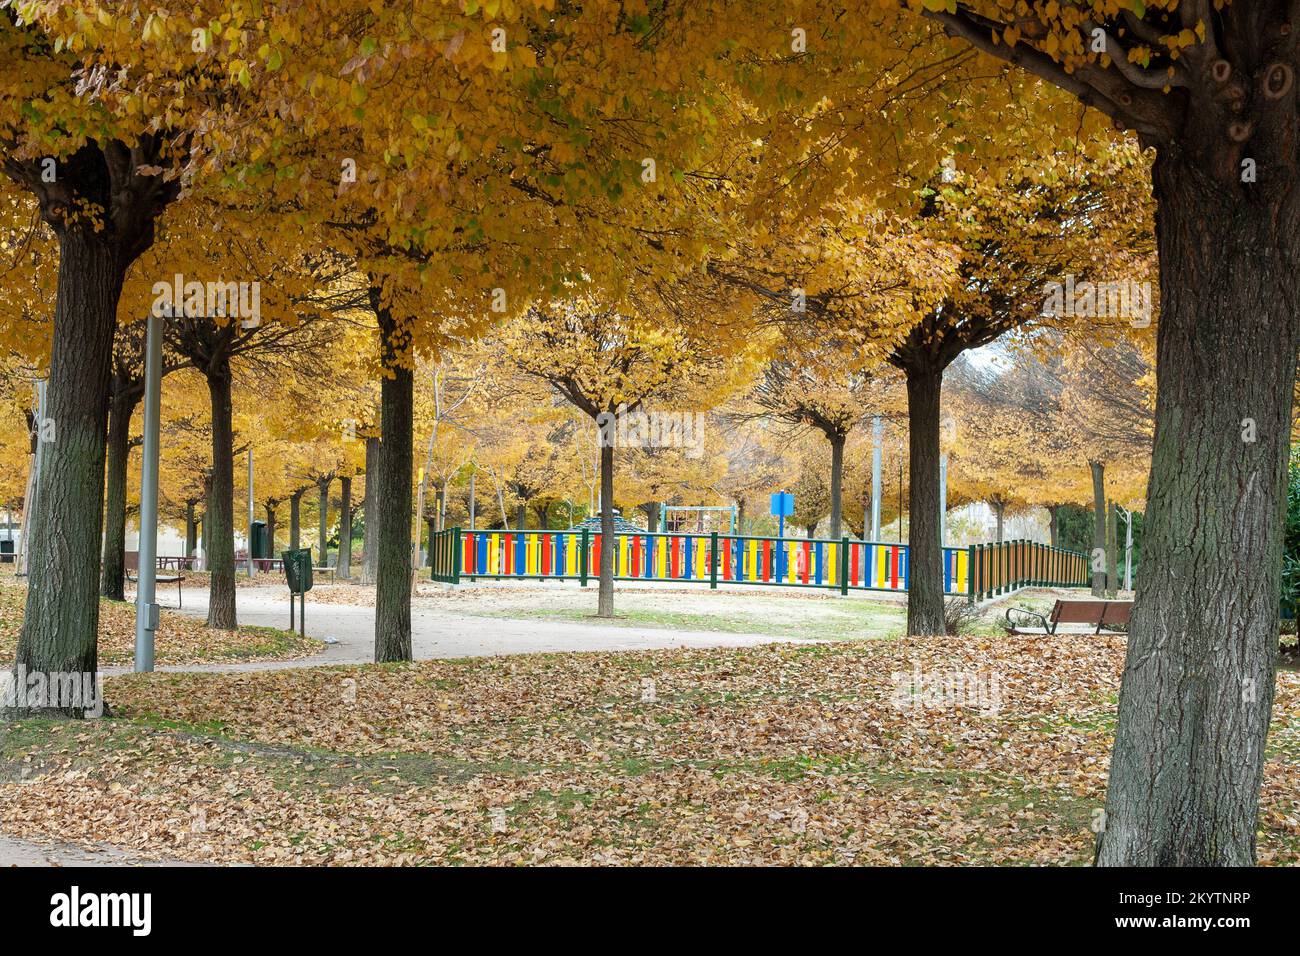 Children's playground in the city of Madrid in the autumn season where the fall and change of color of the leaves of the trees can be seen Stock Photo